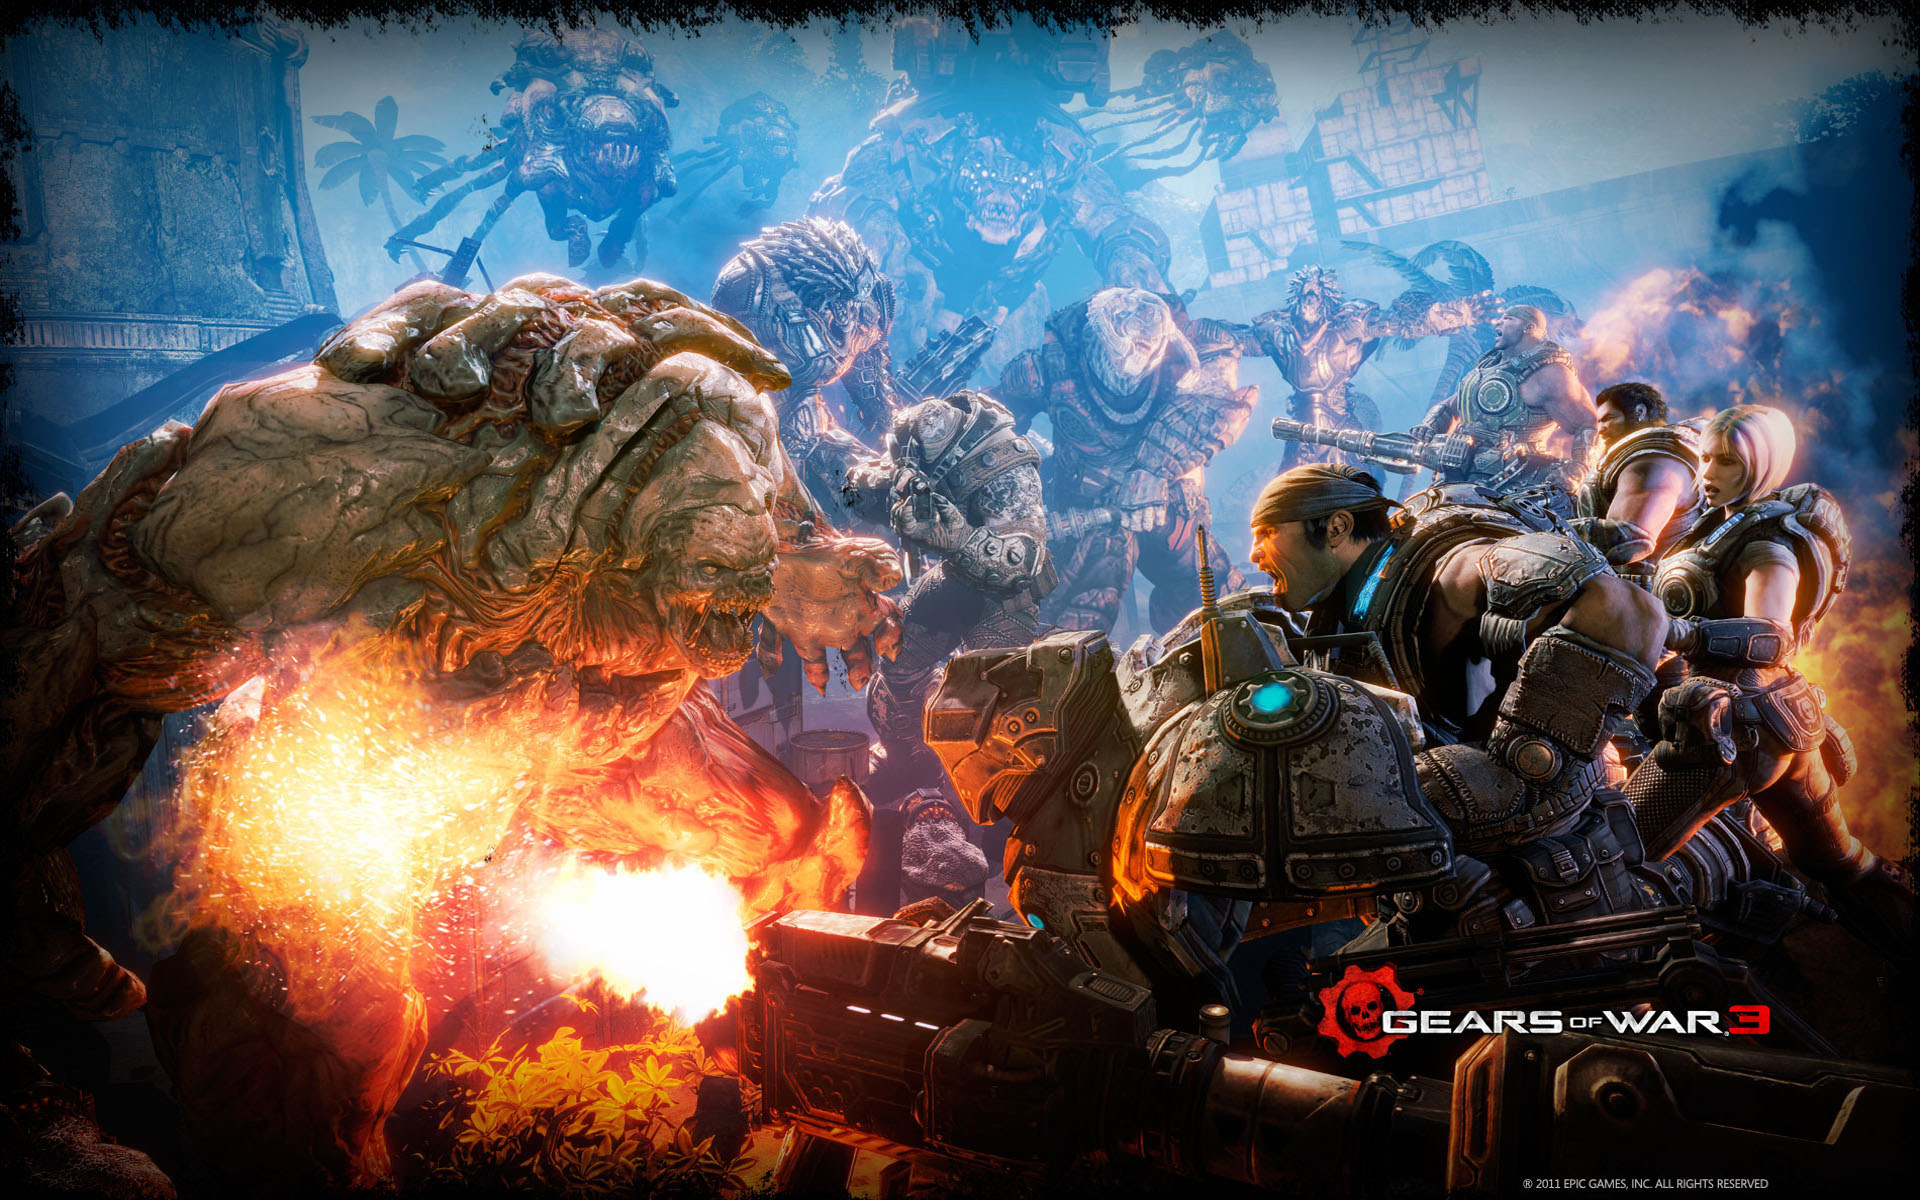 Gears of War 3 Wallpapers 1920x1200   HQ Wallpapers   HQ Wallpapers